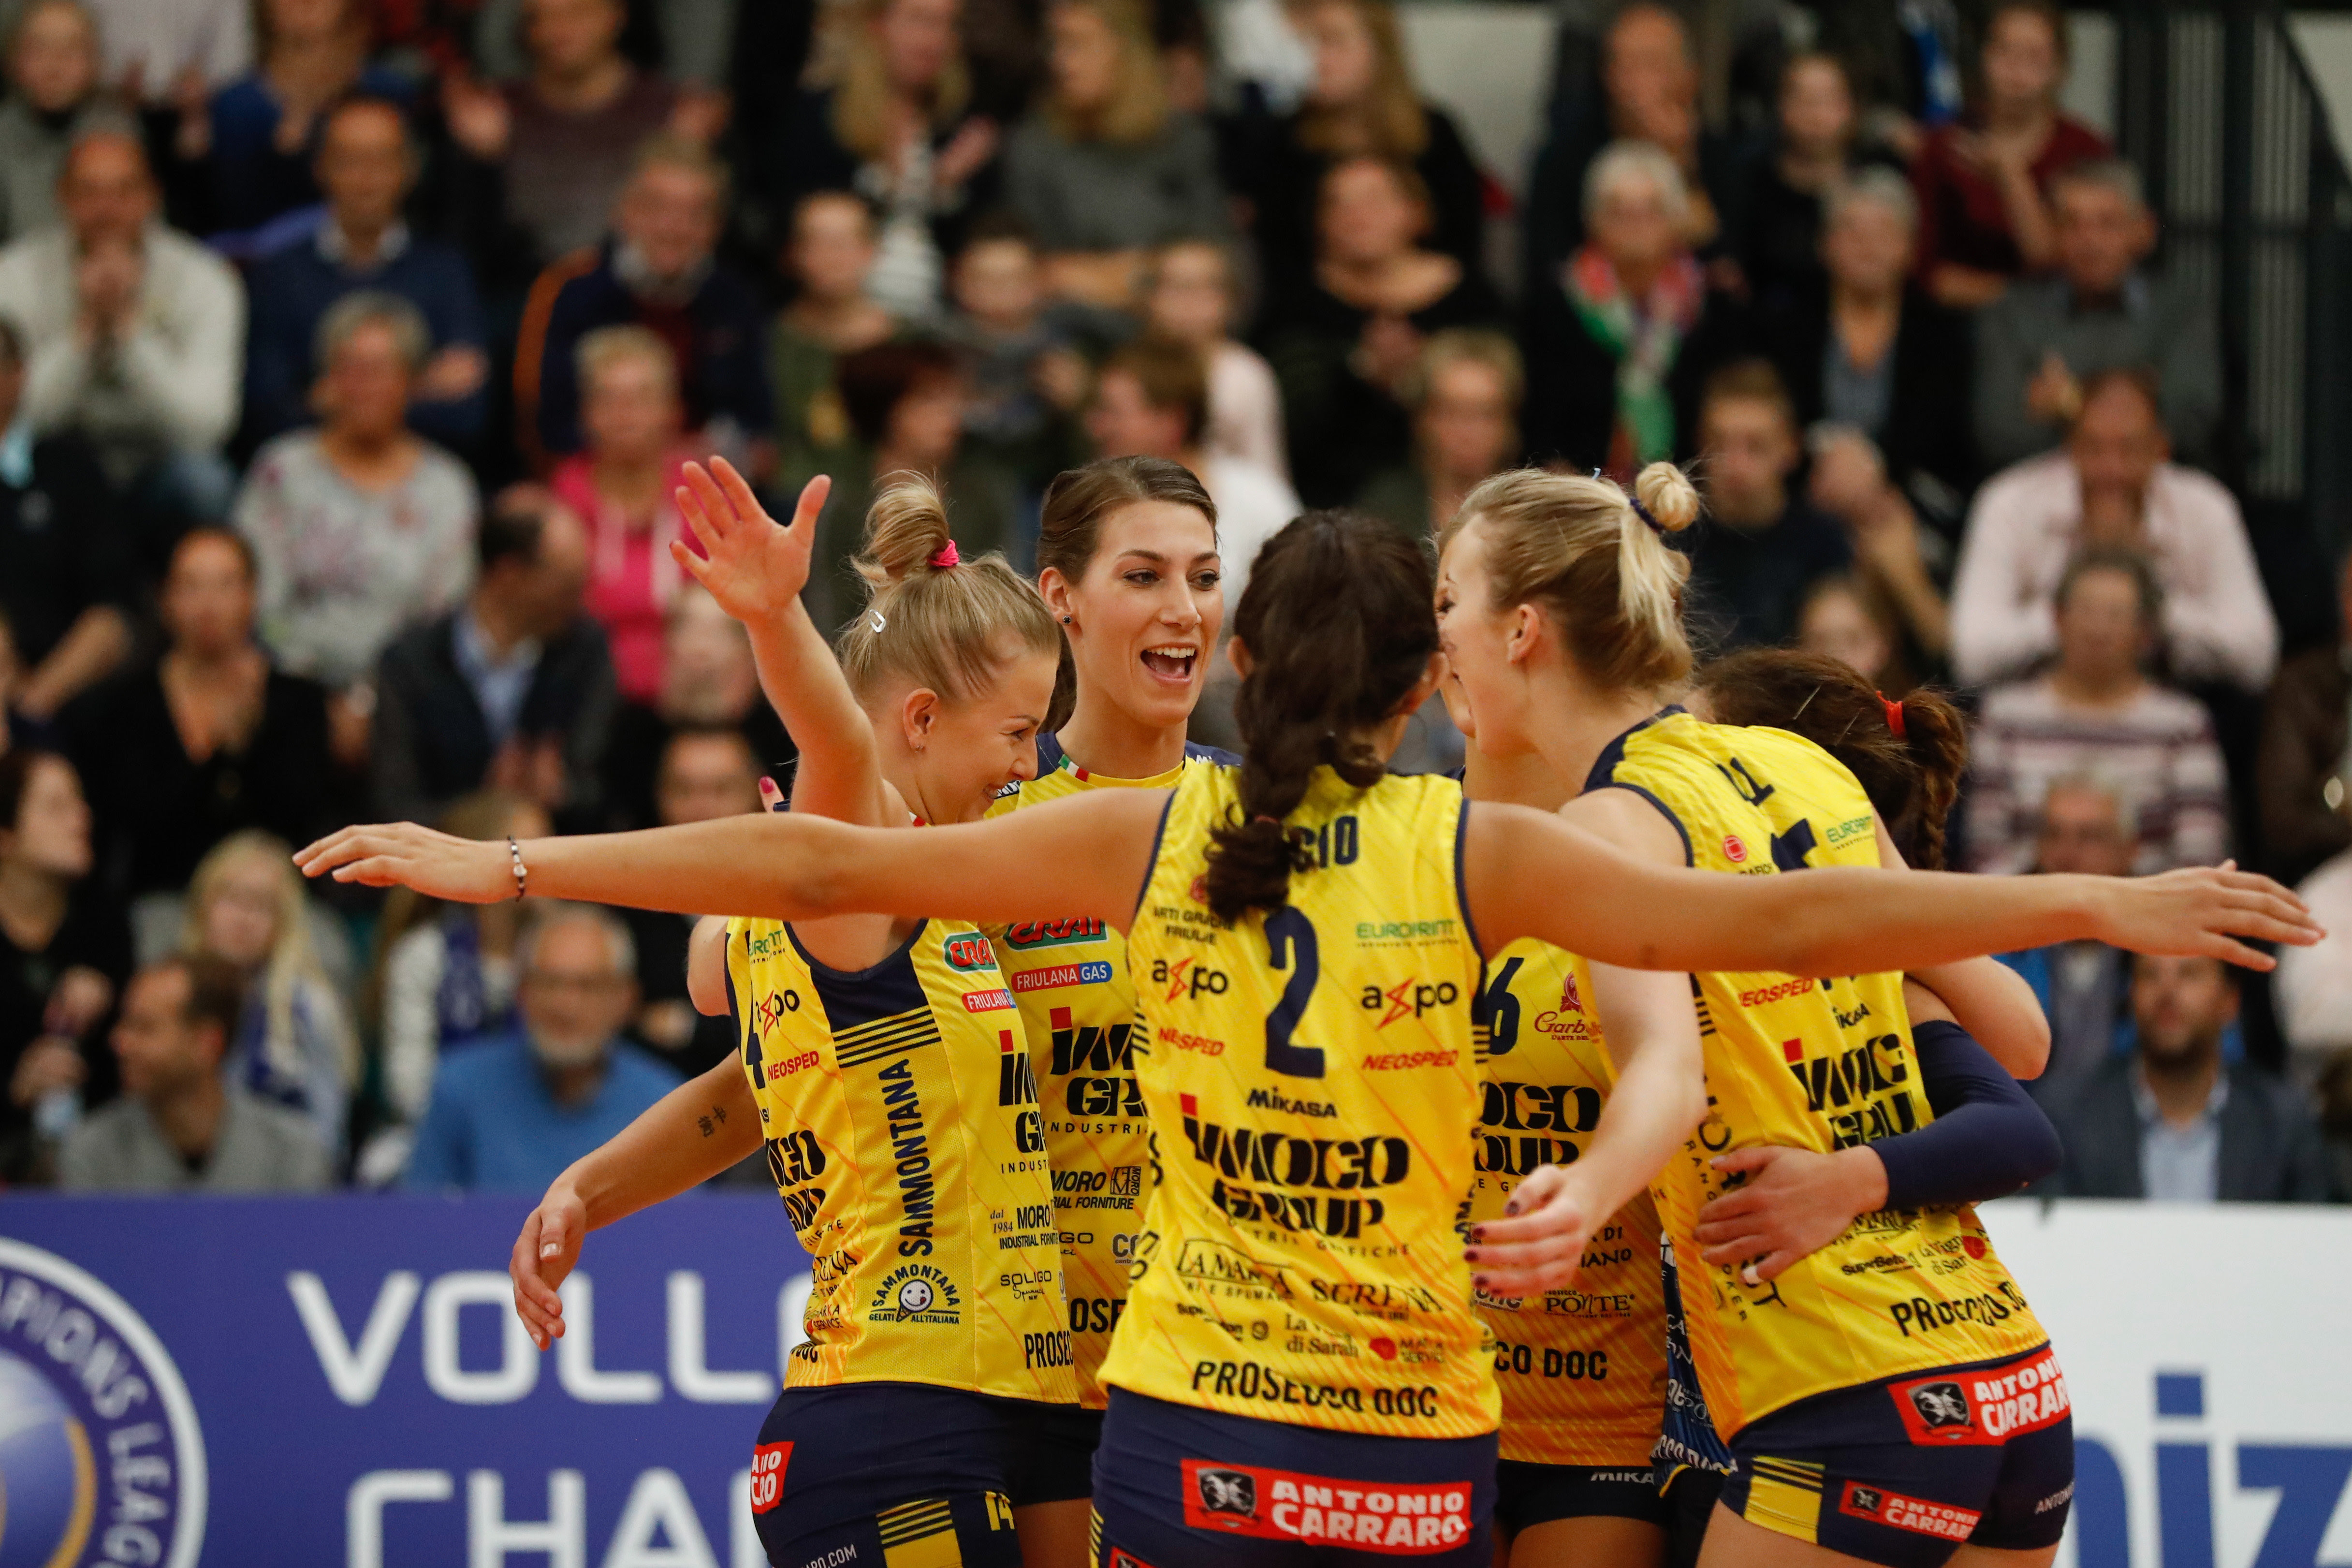  CEV Volleyball Champions League: l’Imoco Volley vince 3-0 in Olanda